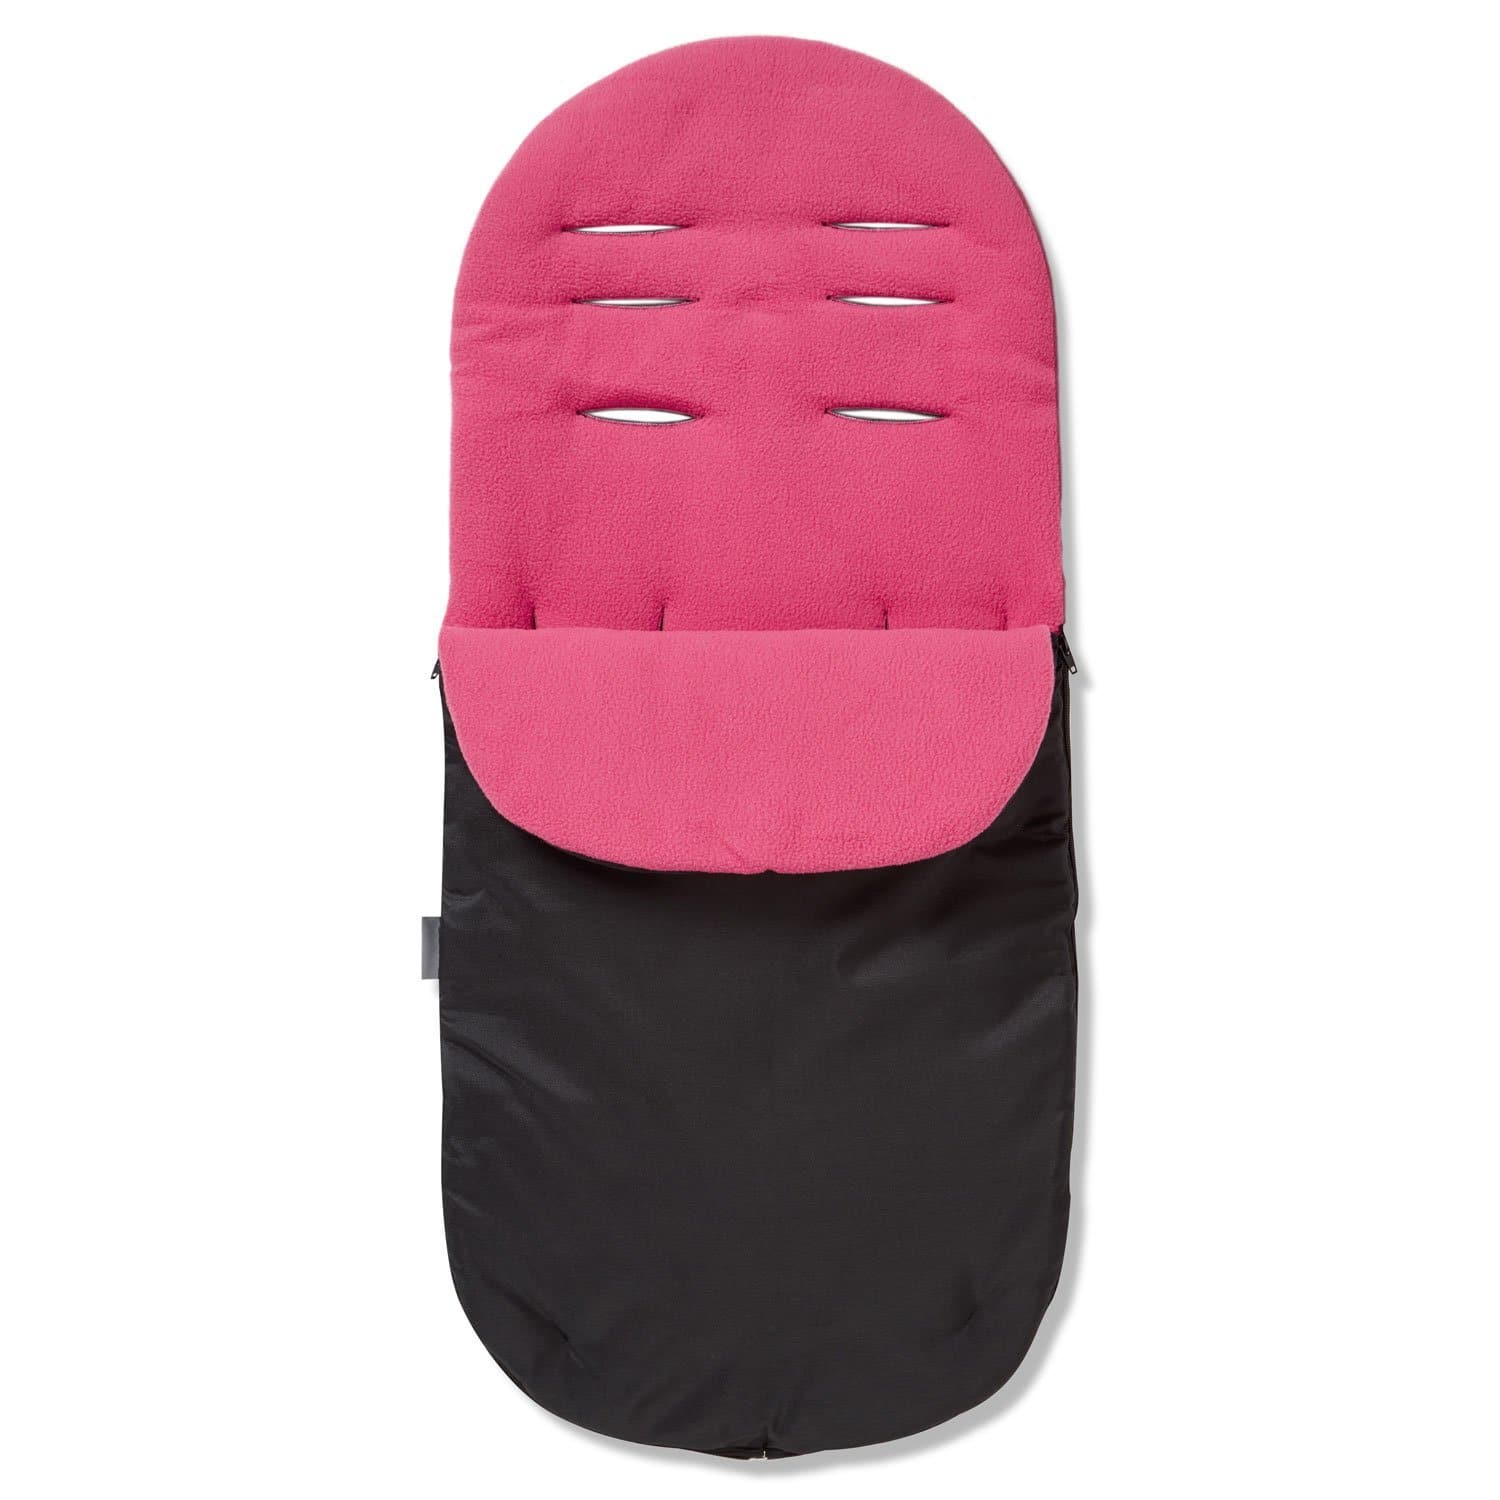 Footmuff / Cosy Toes Compatible with Unilove - For Your Little One